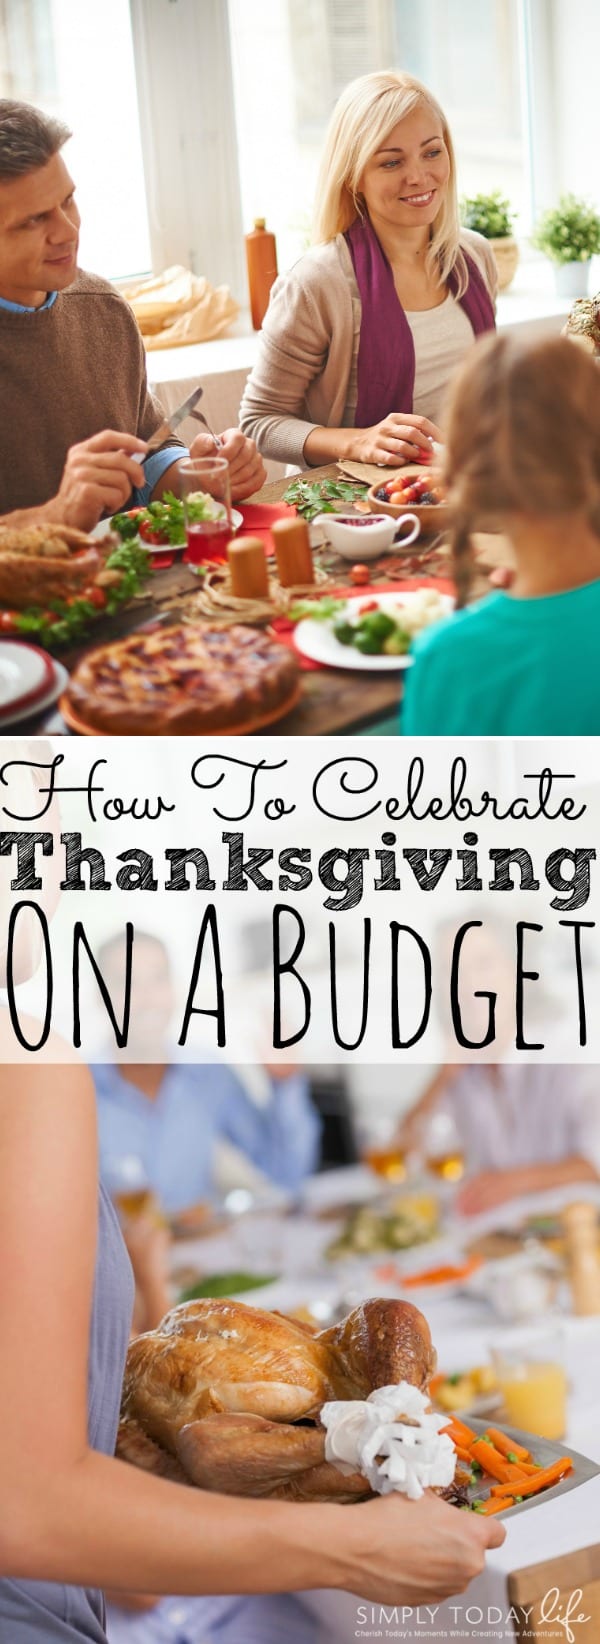 How To Celebrate Thanksgiving On A Budget